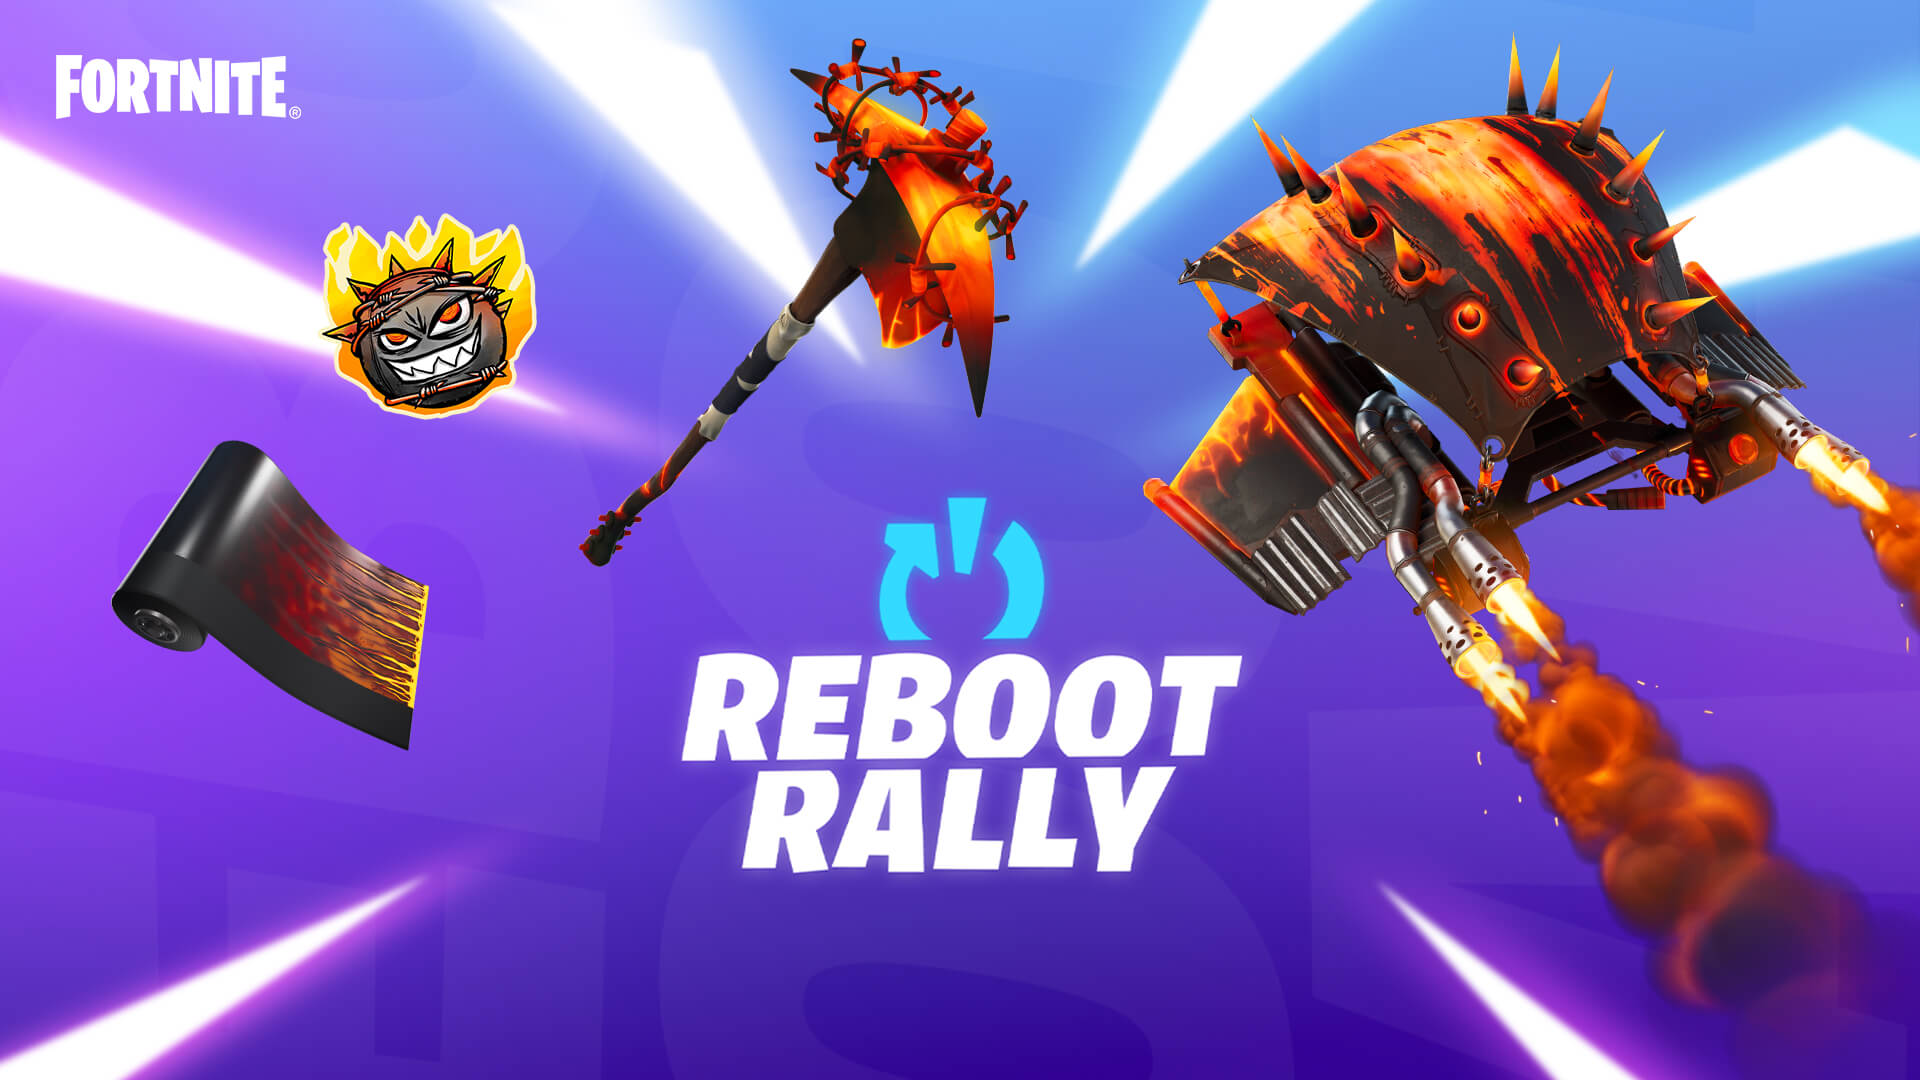 Fortnite Reboot Rally Recruit Friends And Earn Free InGame Rewards